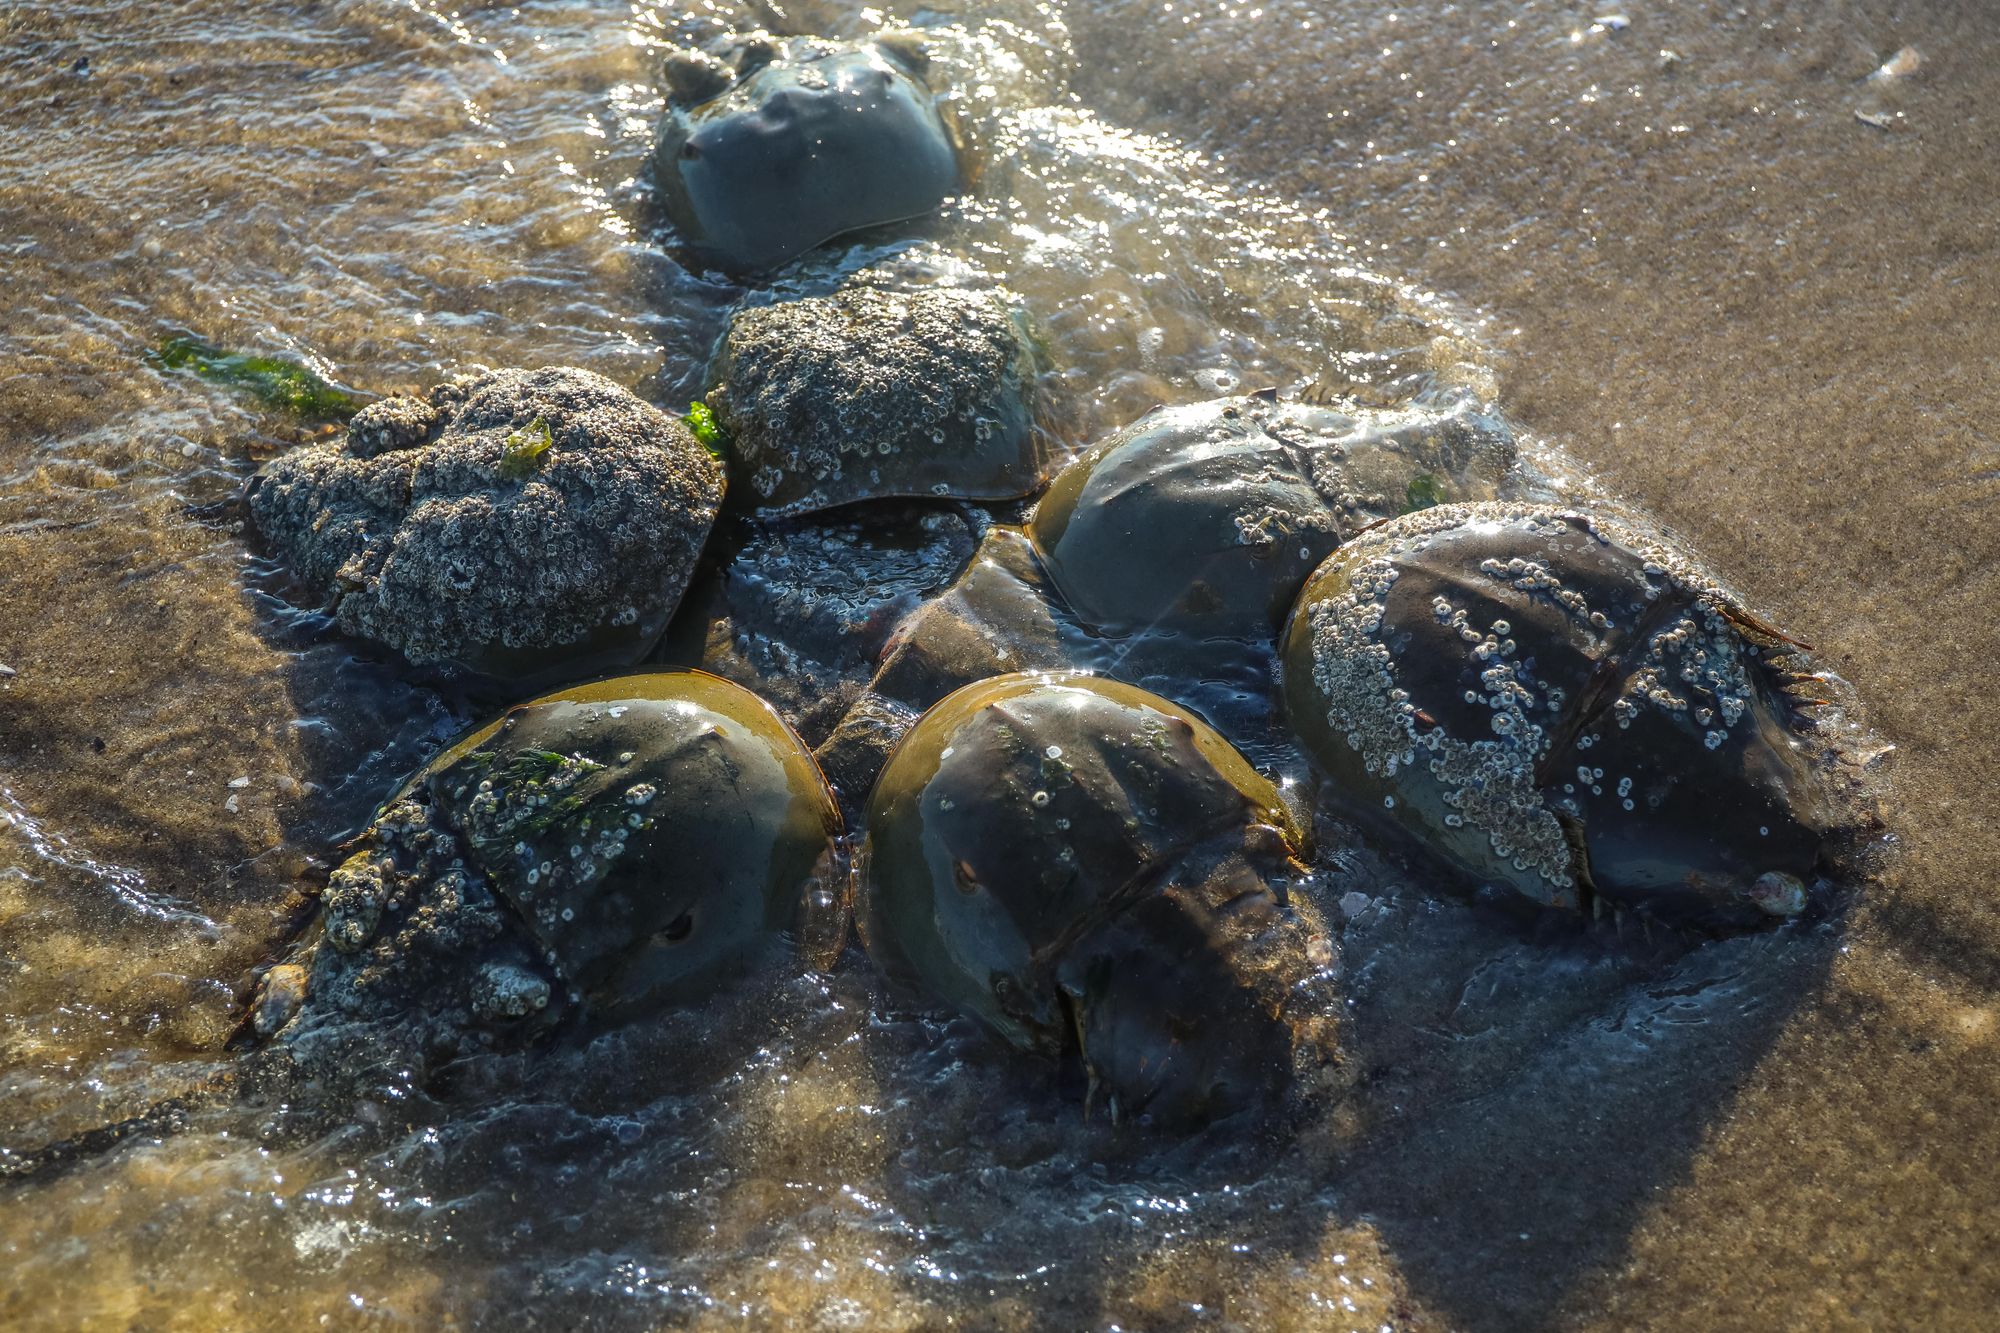 A group of horseshoe crabs copulate in shallow water at Plumb Beach in Queens.